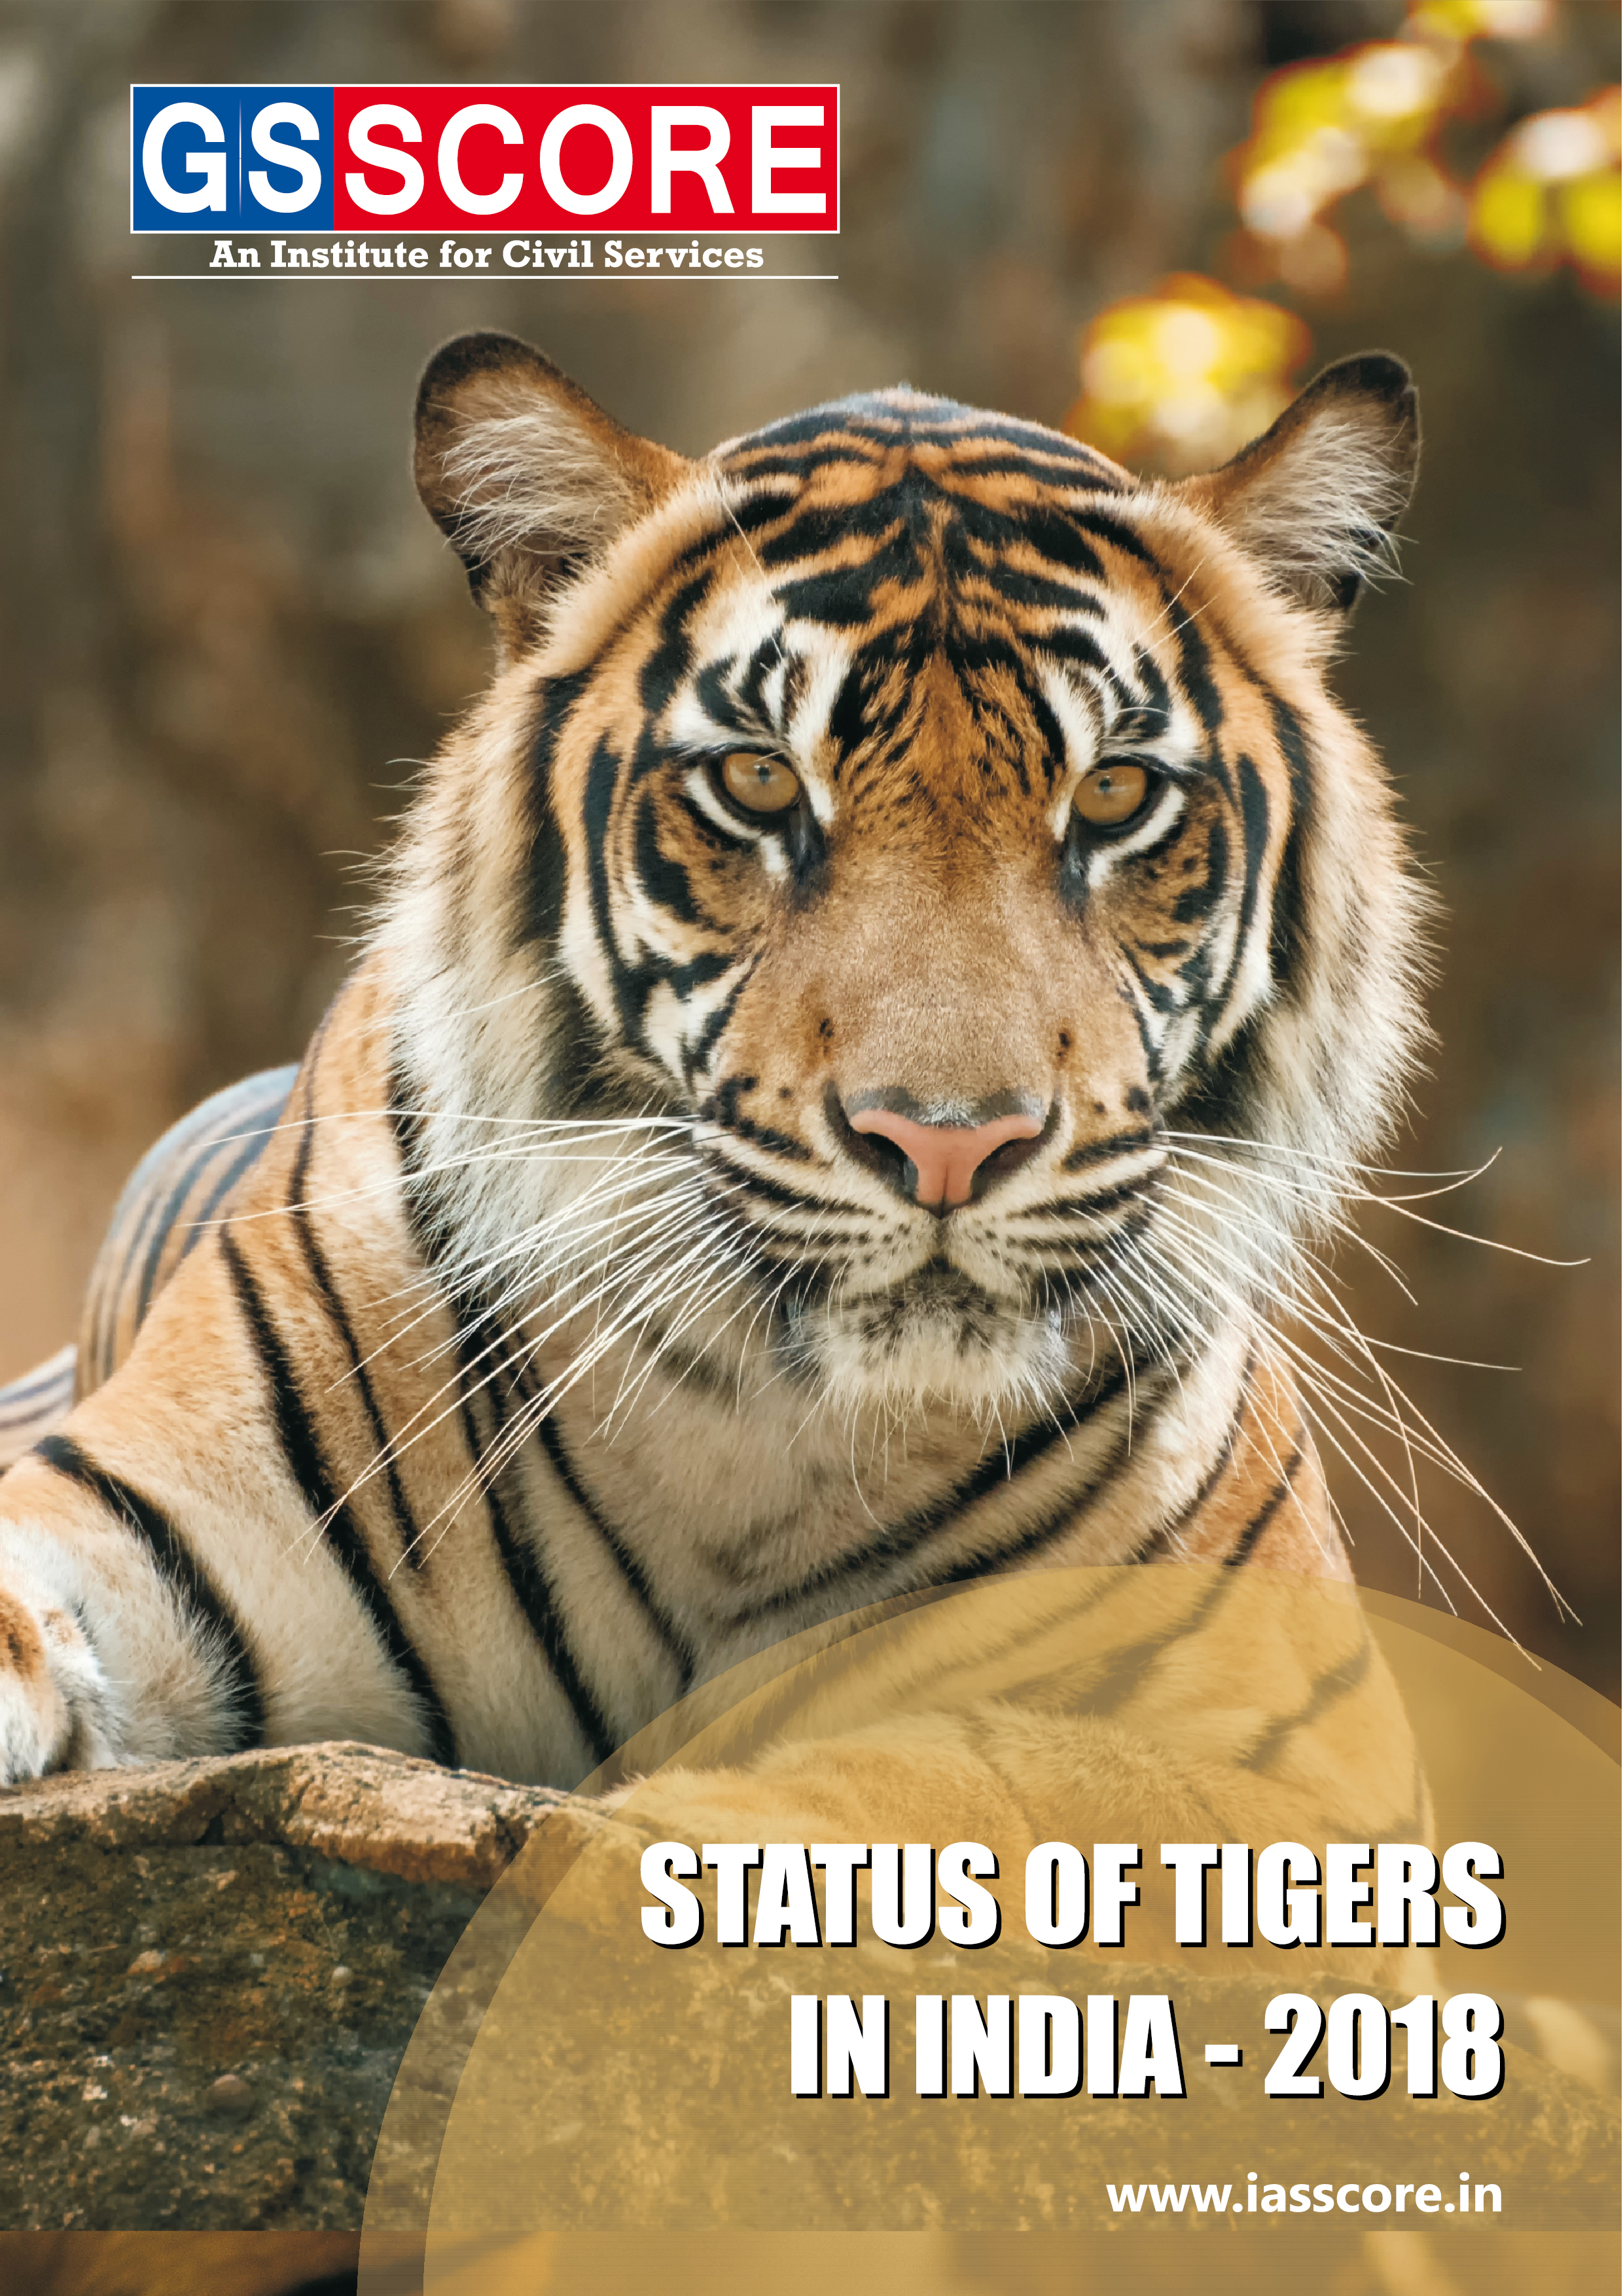 “Status of Tigers in India - 2018”